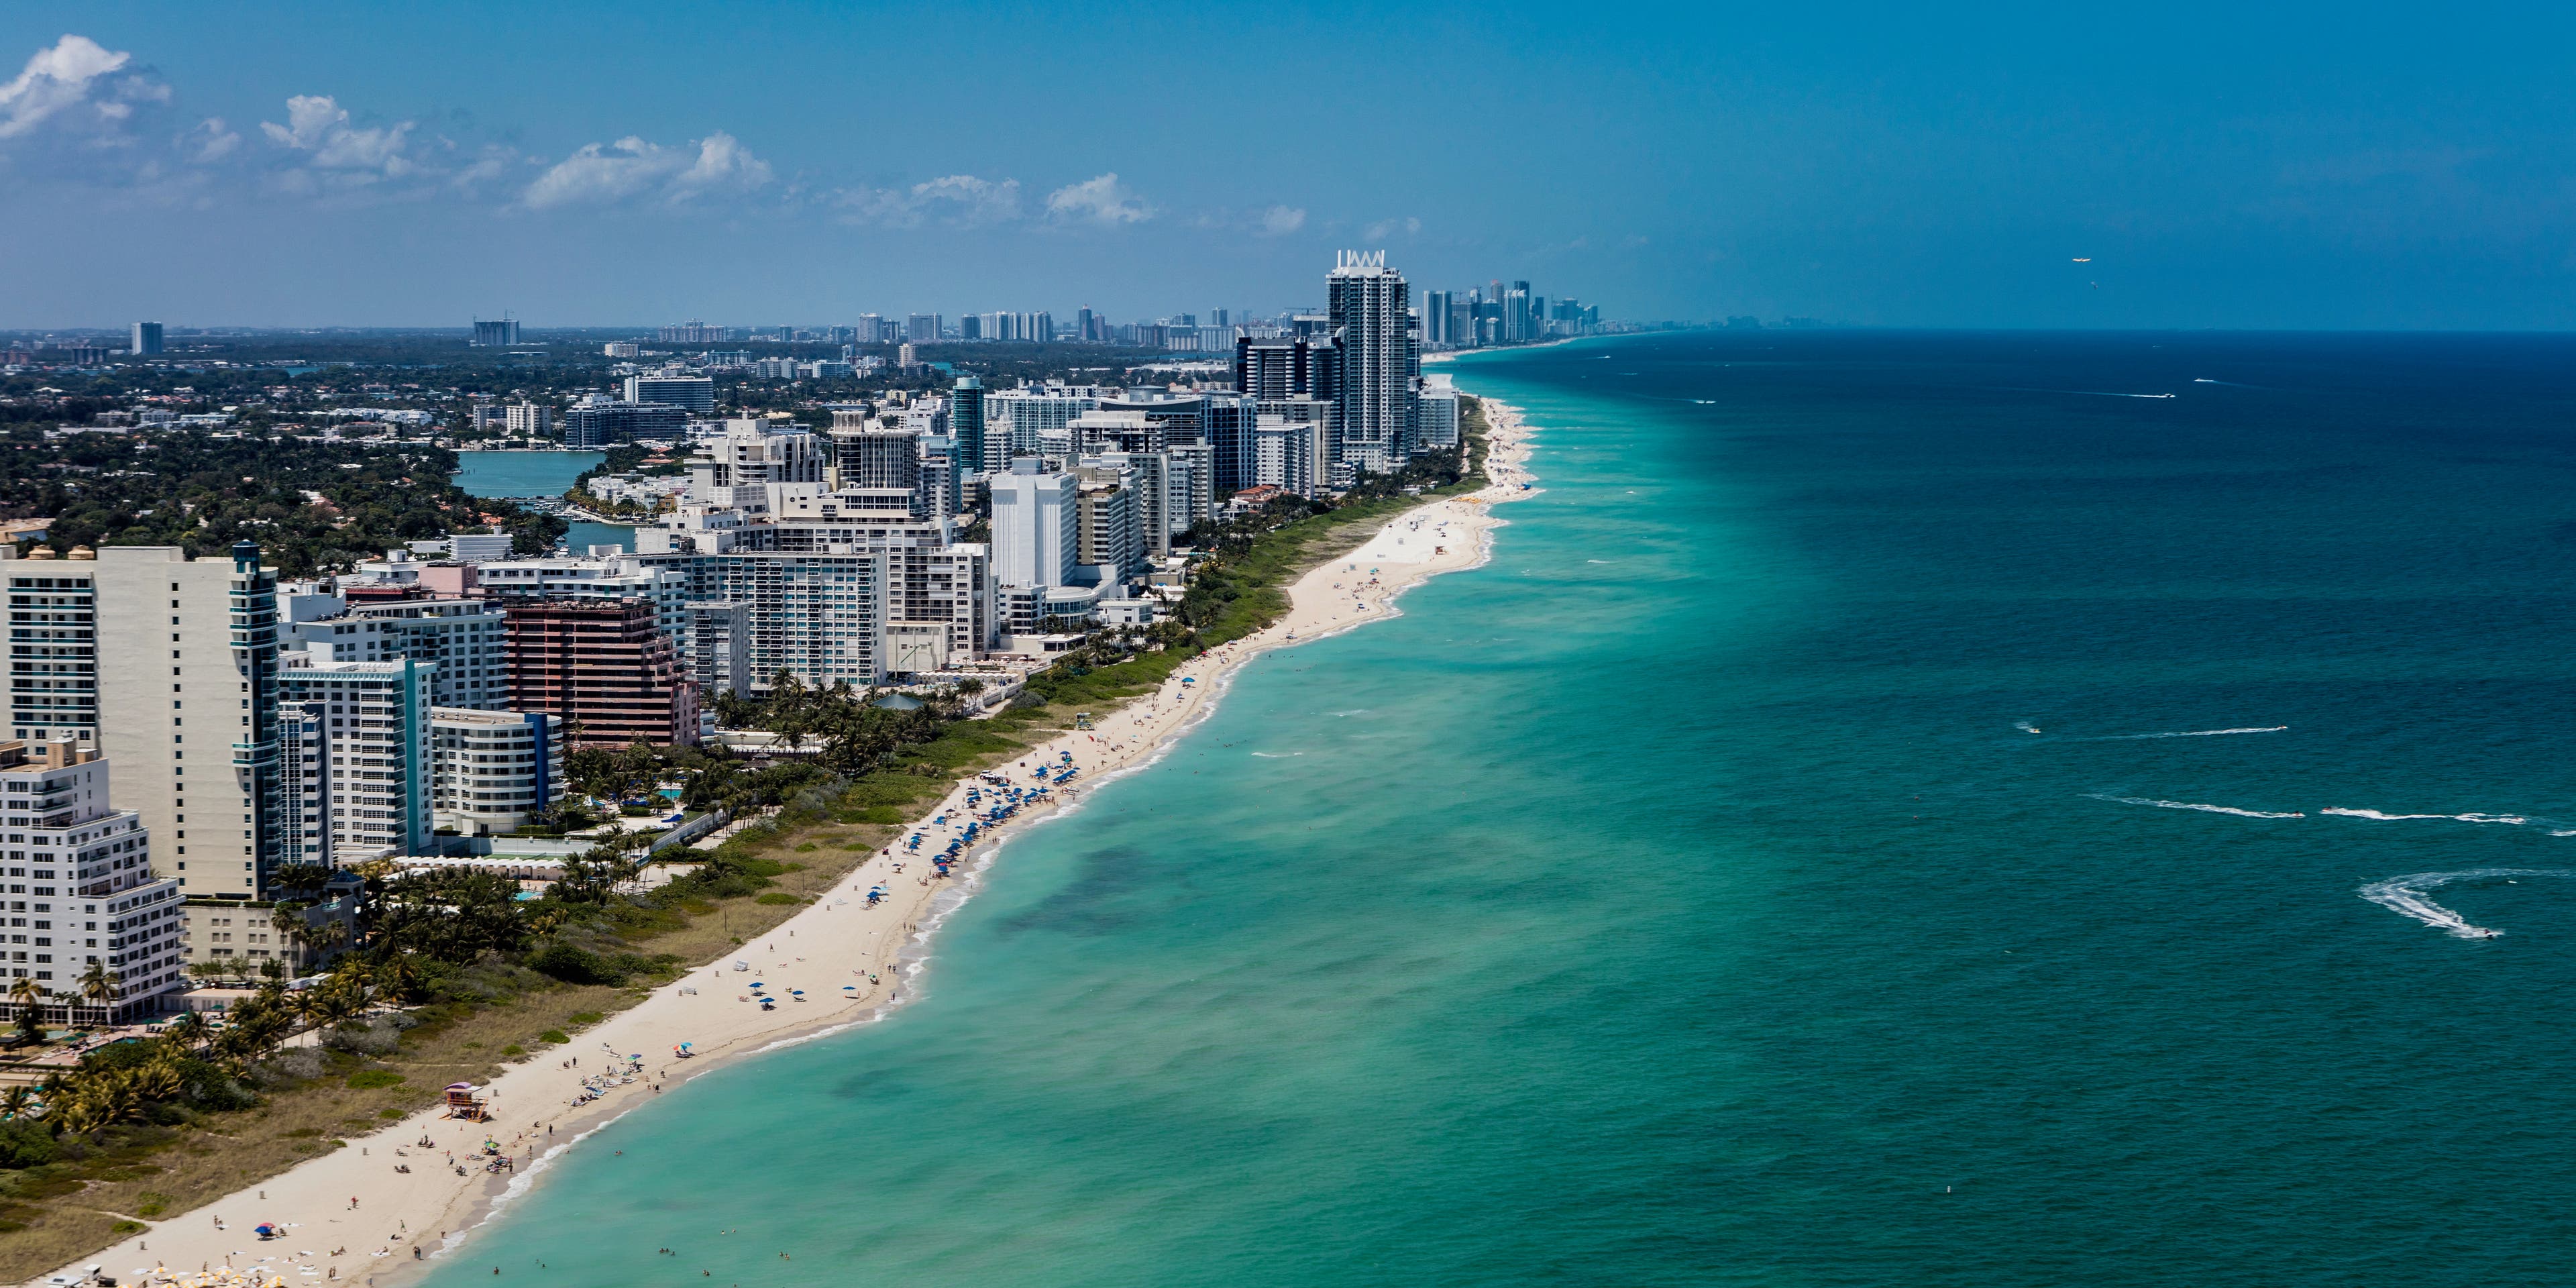 Aerial view of South Beach Miami Florida cityscape with buildings along the beach on a beautiful sunny day, people on beach and ocean.